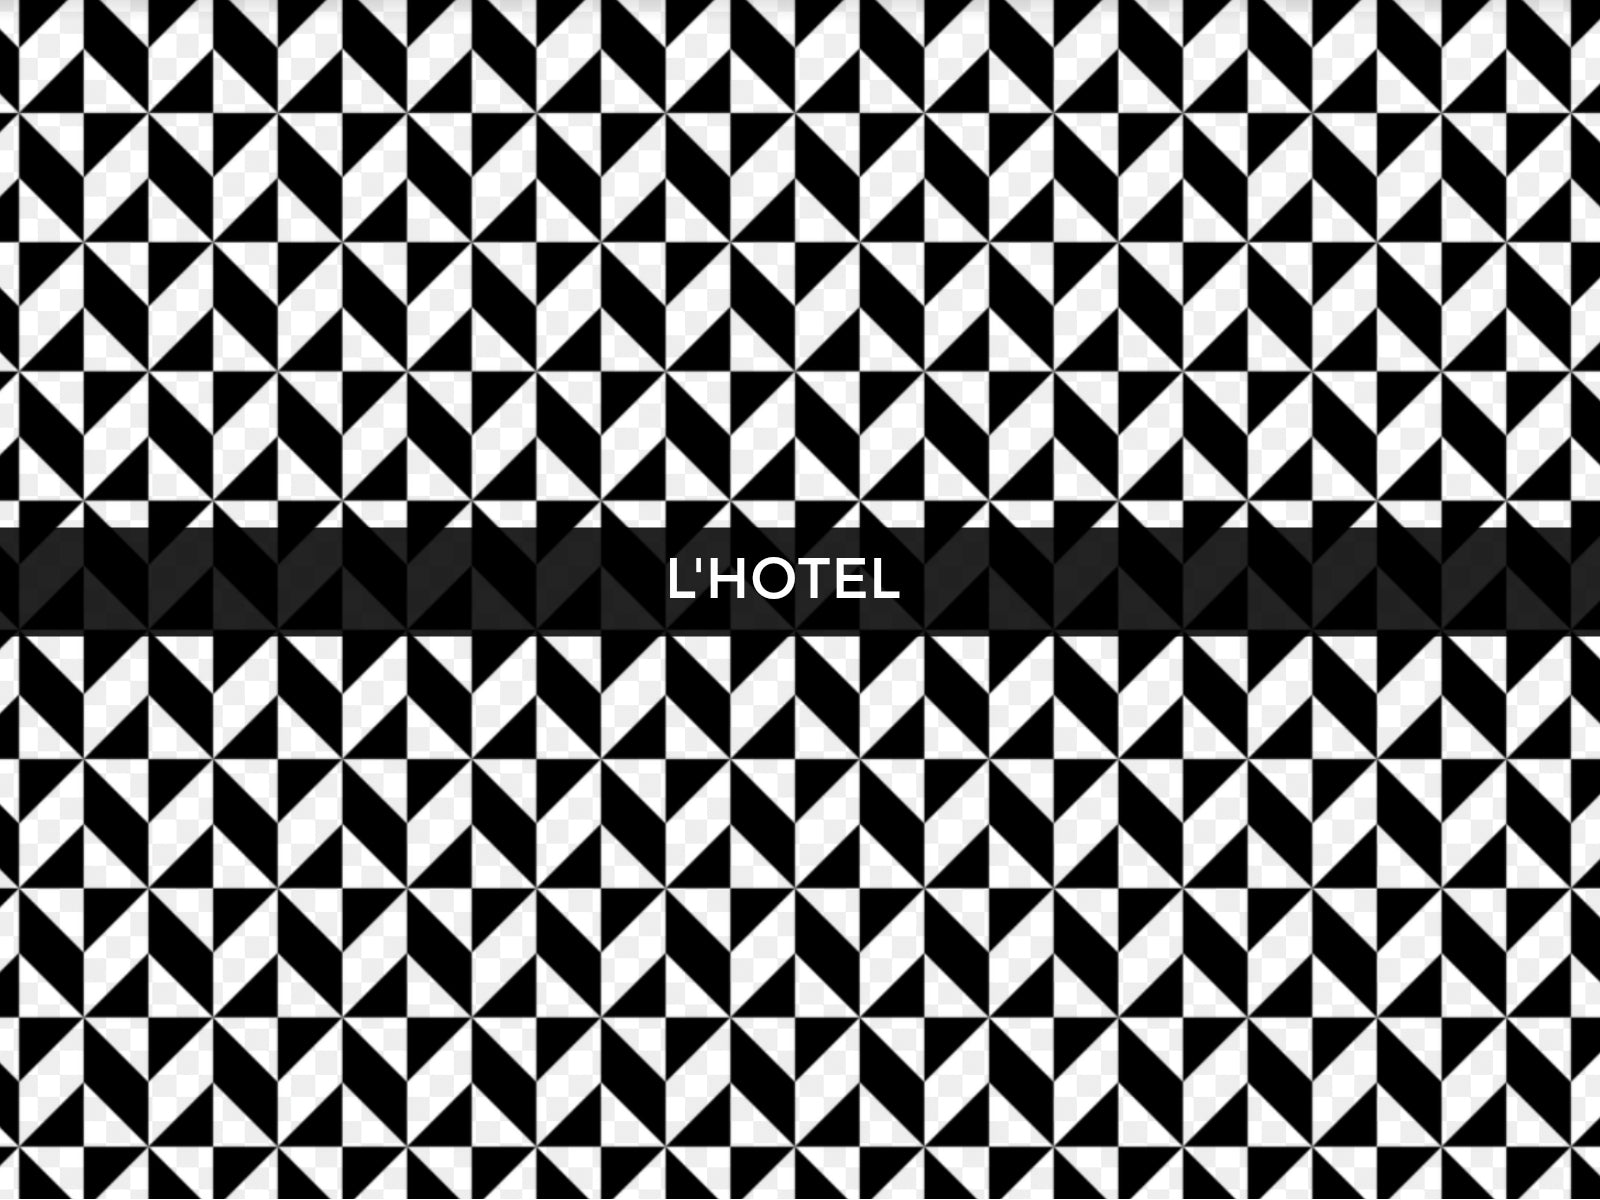 SHOP THE ROOM: L'HOTEL